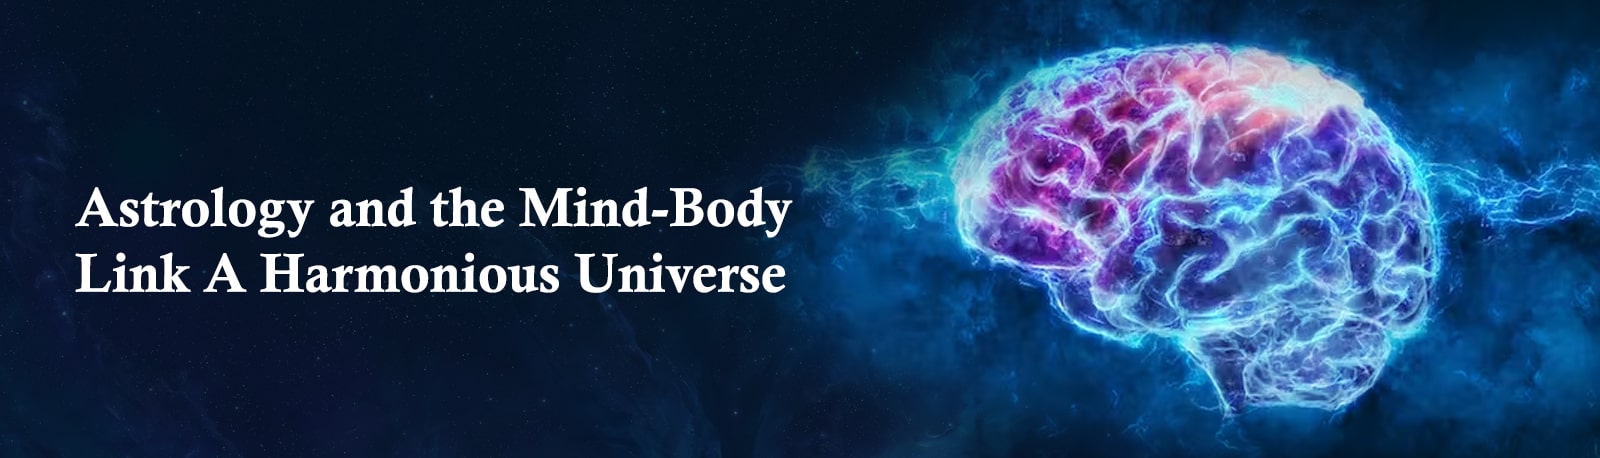 Astrology and the Mind-Body Link: A Harmonious Universe